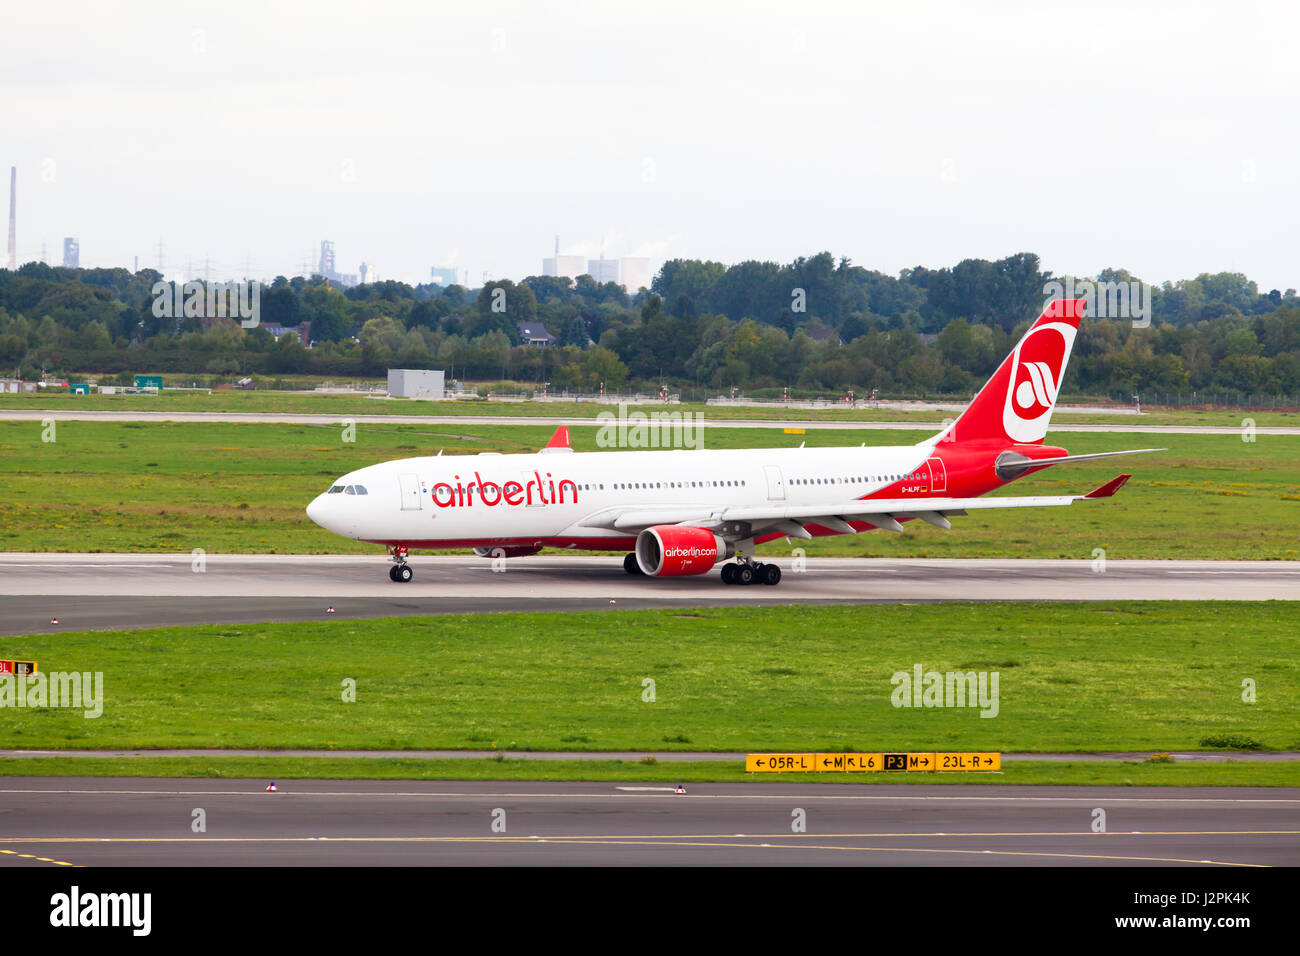 DUSSELDORF, GERMANY - SEPTEMBER 05: An Air Berlin Boeing 737 taxis on September 05, 2015 in Dusseldorf, Germany. Air Berlin is Germany's second larges Stock Photo